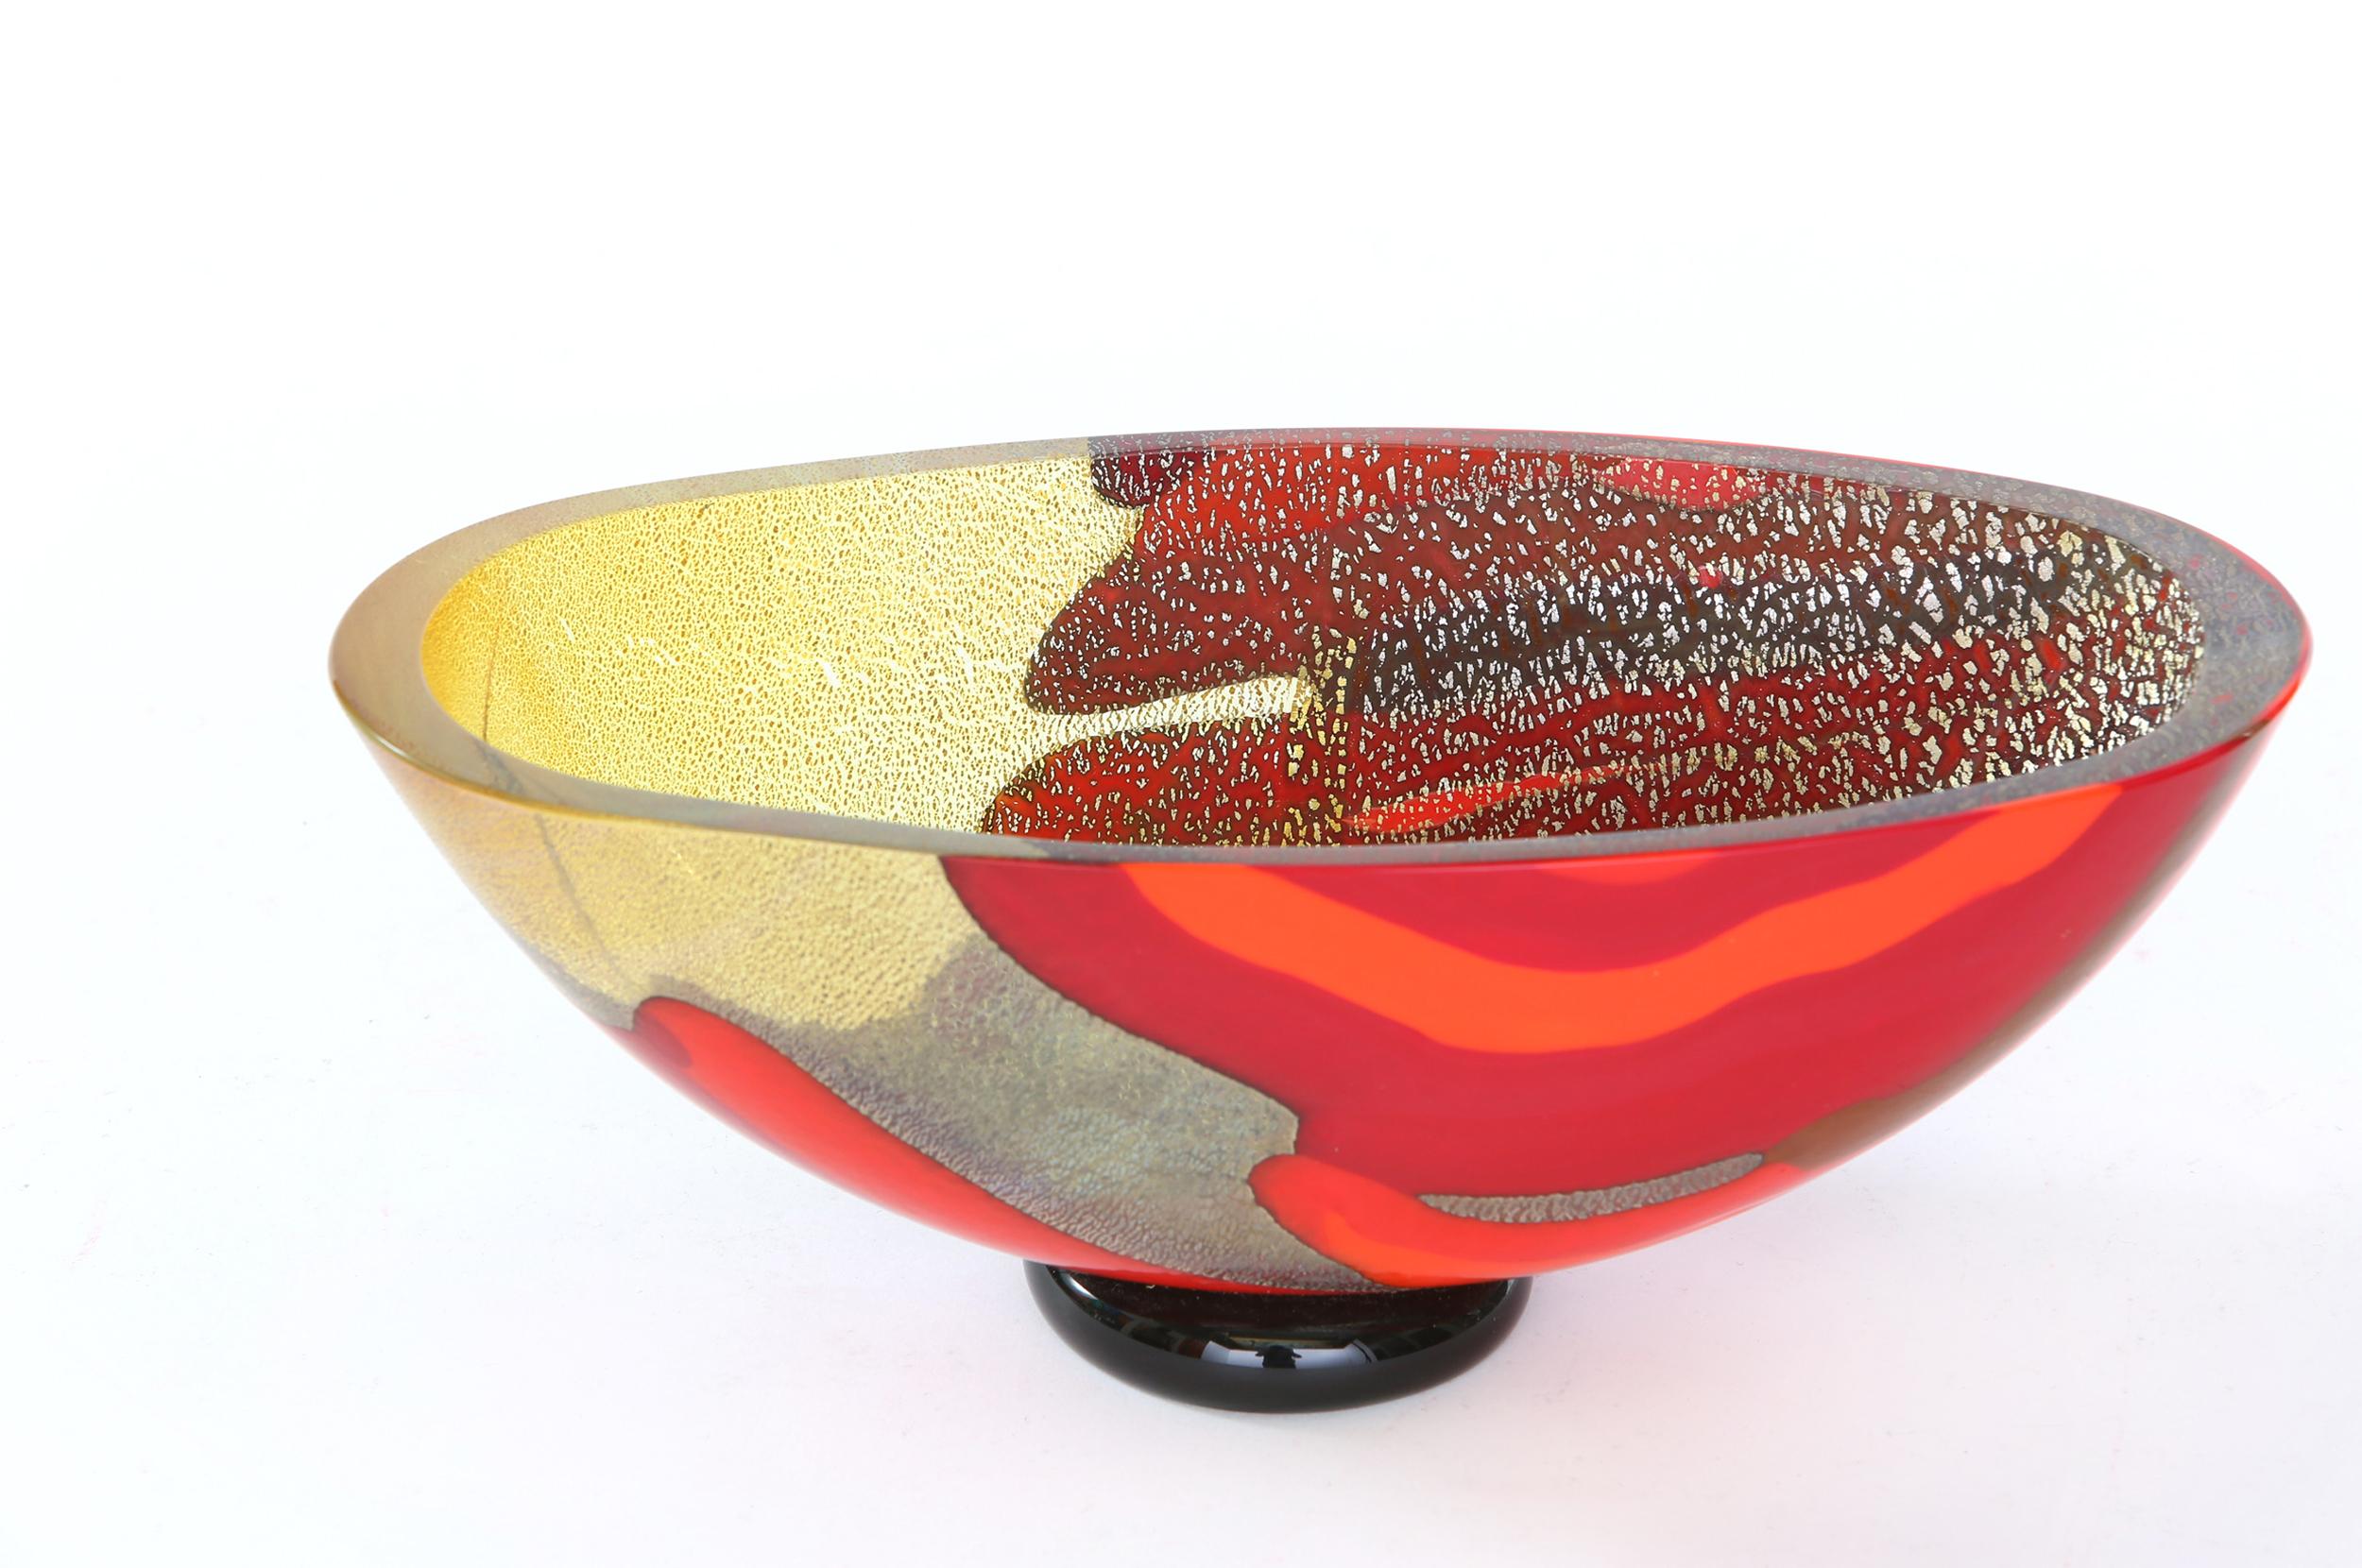 Mid-20th century Italian Murano glass decorative bowl with gold flecks design details. The decorative bowl is in great condition. Maker's mark undersigned & numbered 